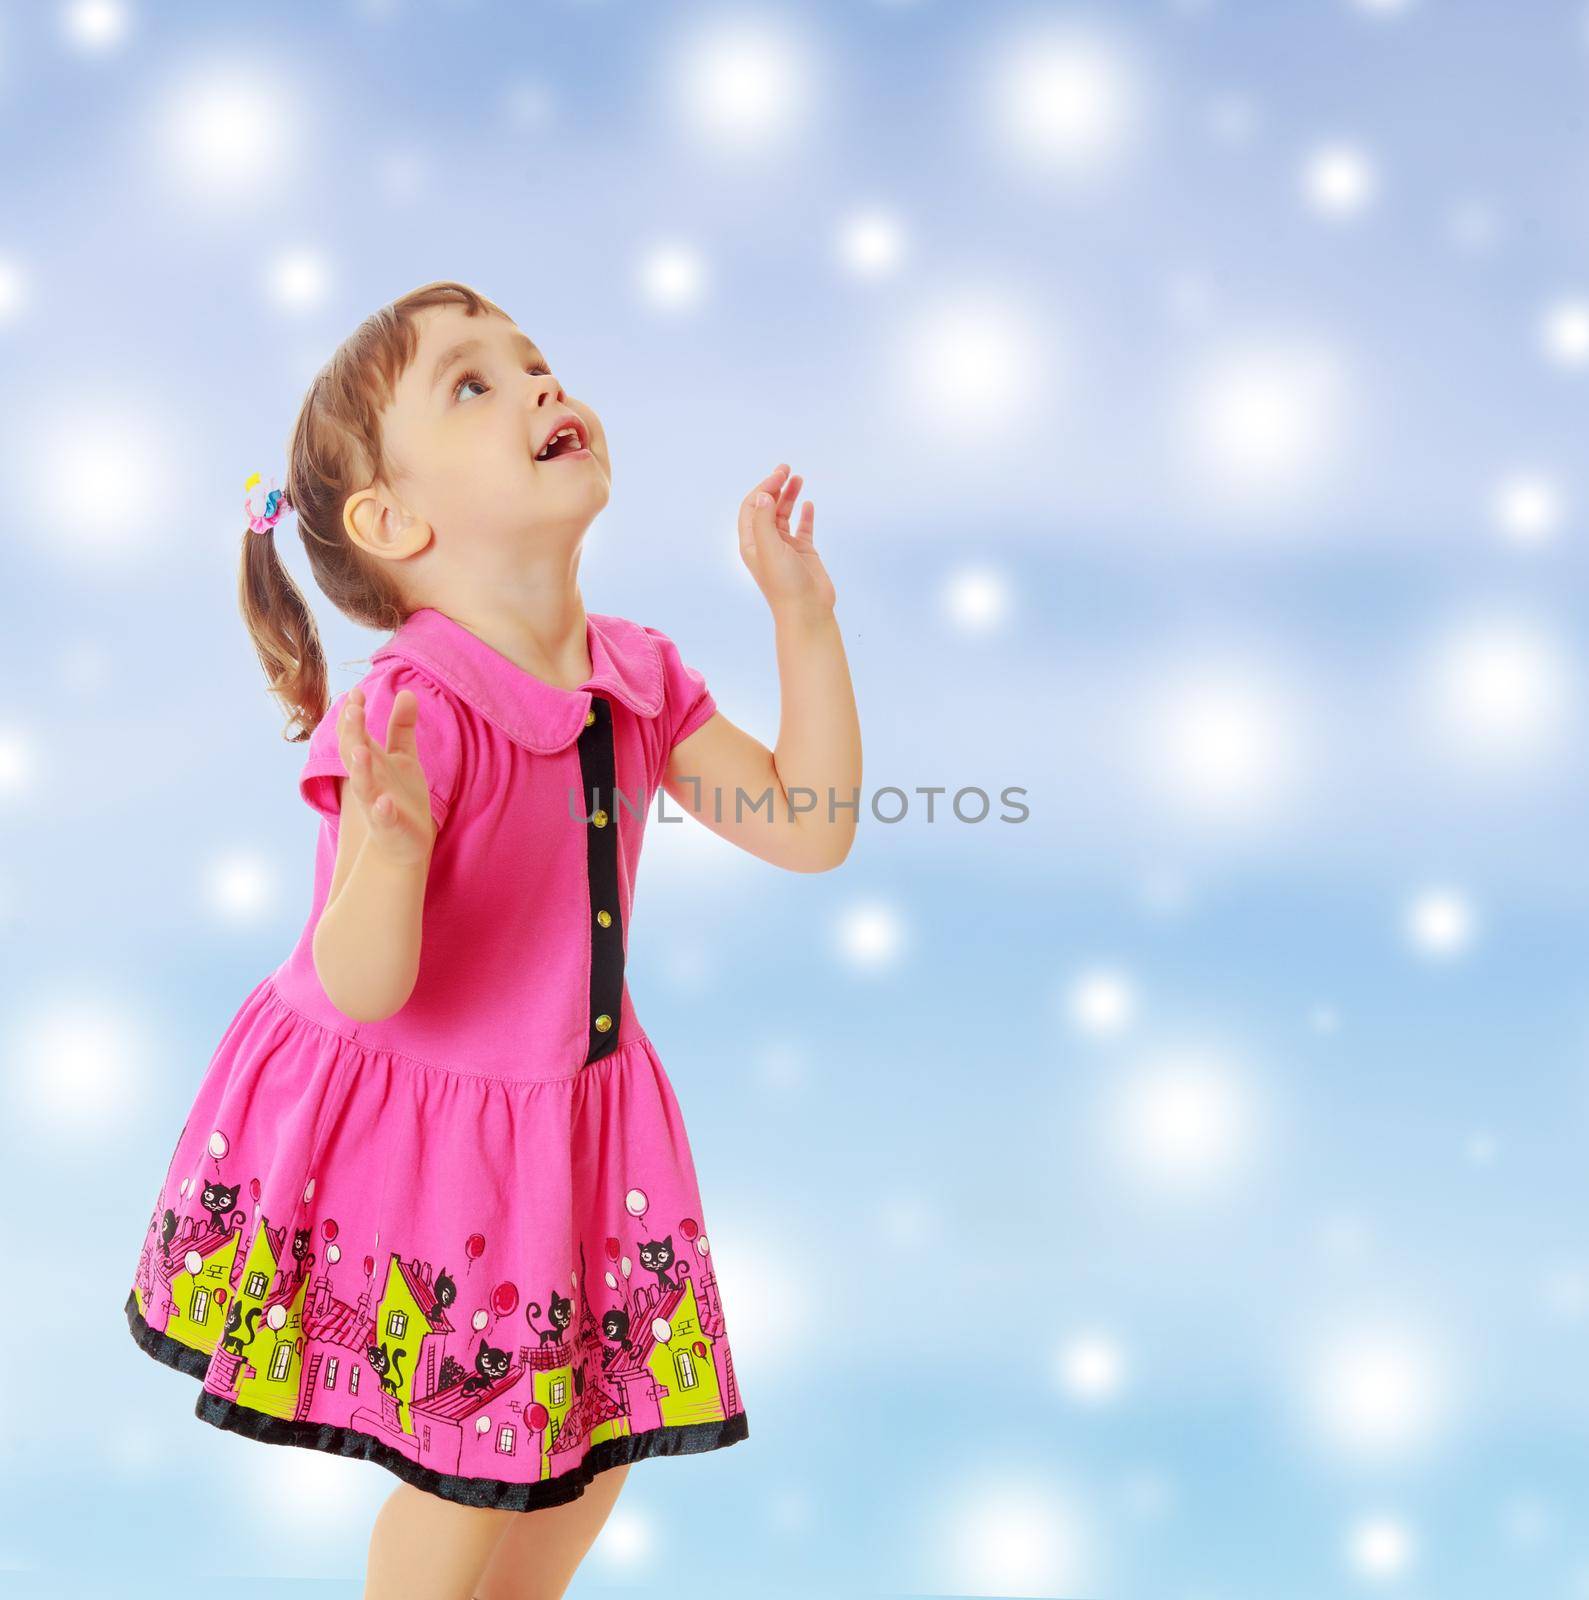 Pensive little girl with pigtails on the head , in a pink dress. The girl was looking at the top turned sideways to the camera.On new year or Christmas blue background with white big stars.